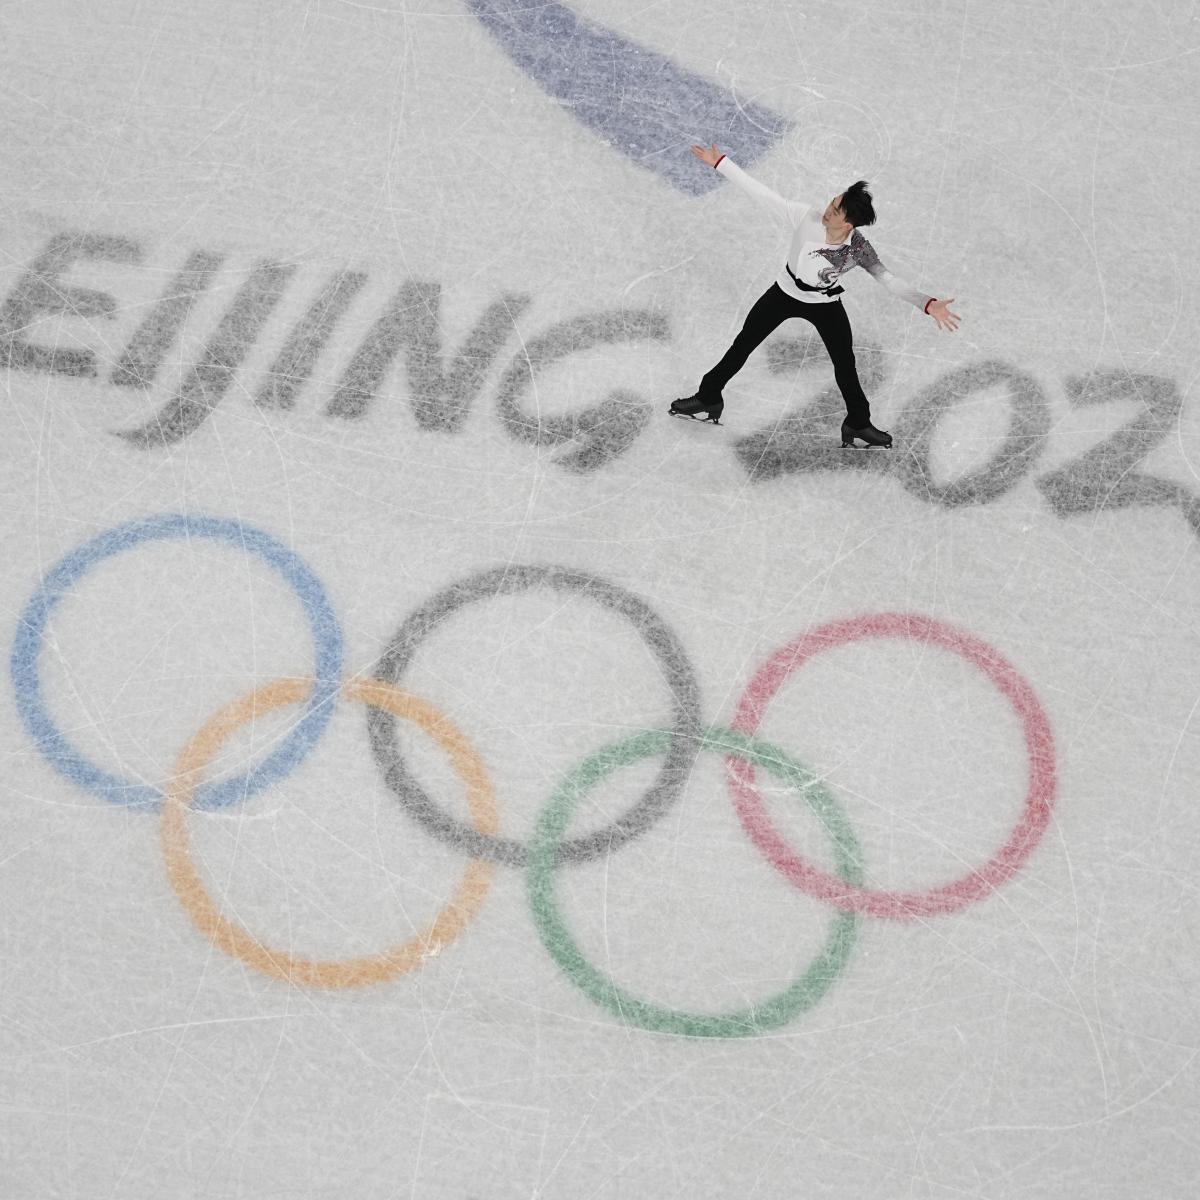 Olympic Figure Skating Schedule 2022: TV, Live Stream for Exhibition